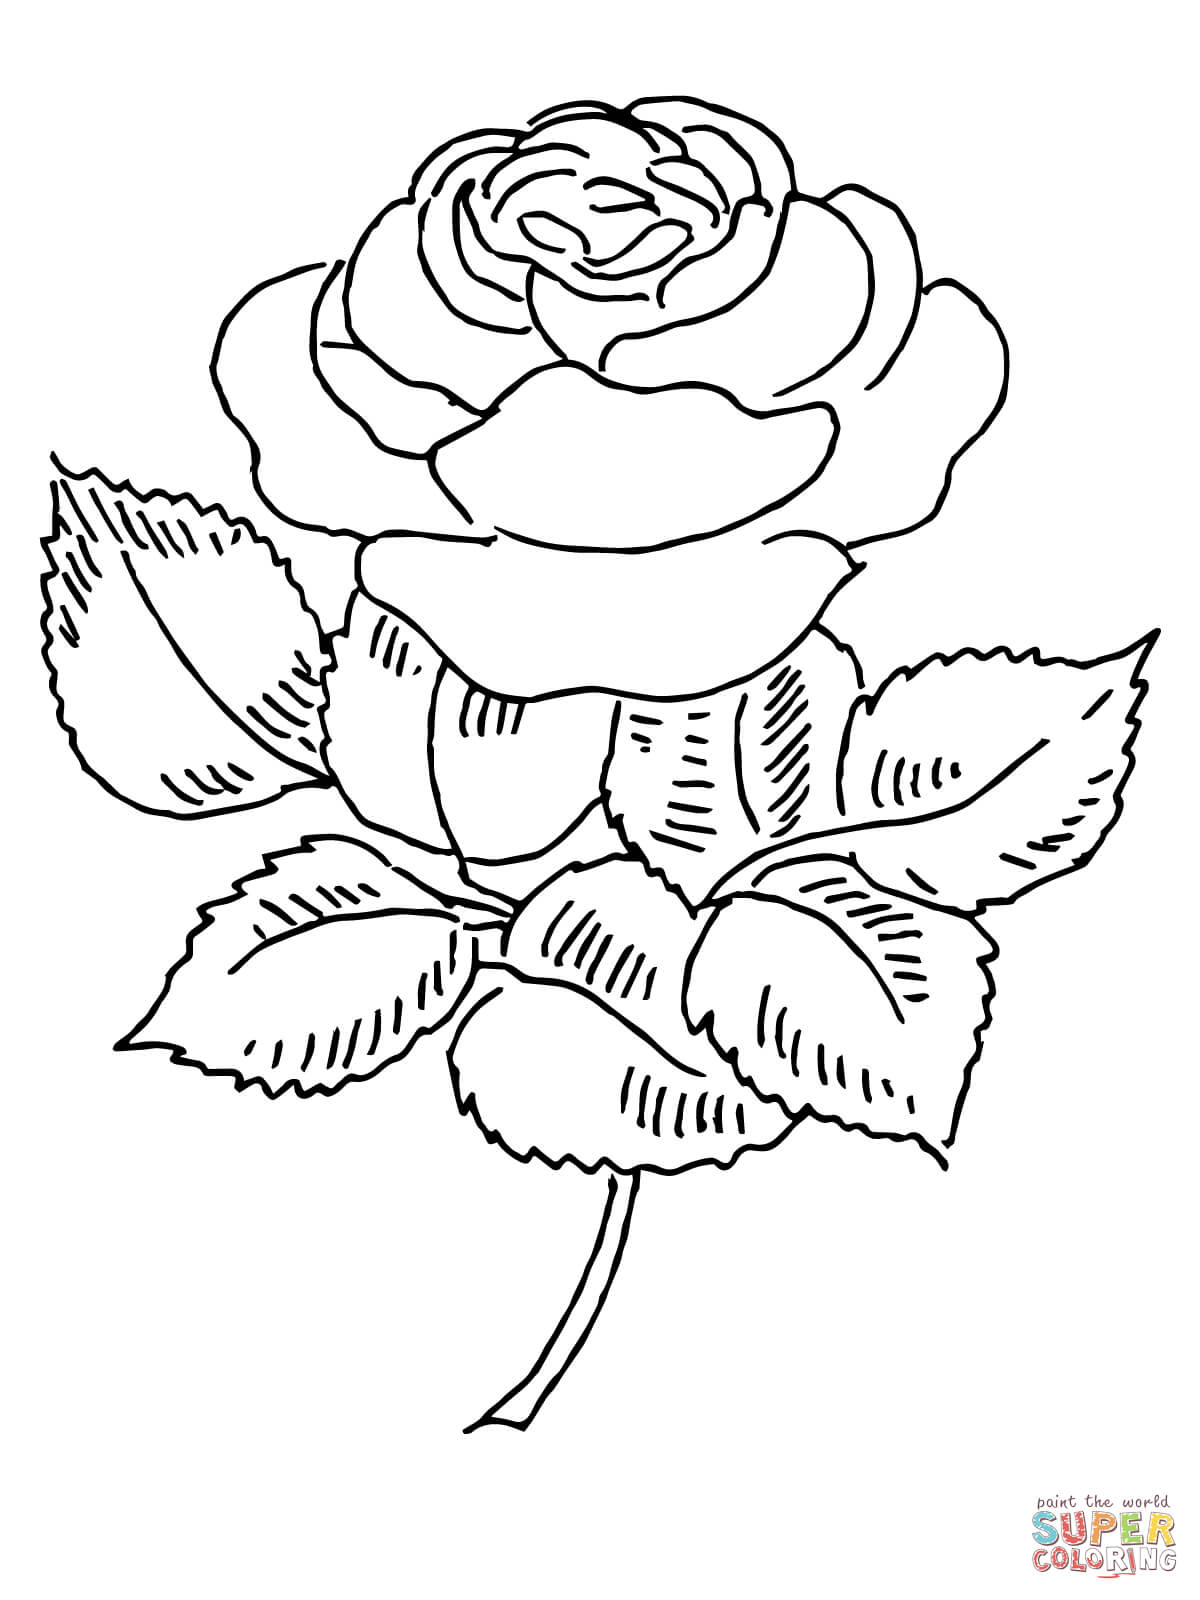 Free Intricate Rose Coloring Page, Download Free Intricate Rose Coloring  Page png images, Free ClipArts on Clipart Library